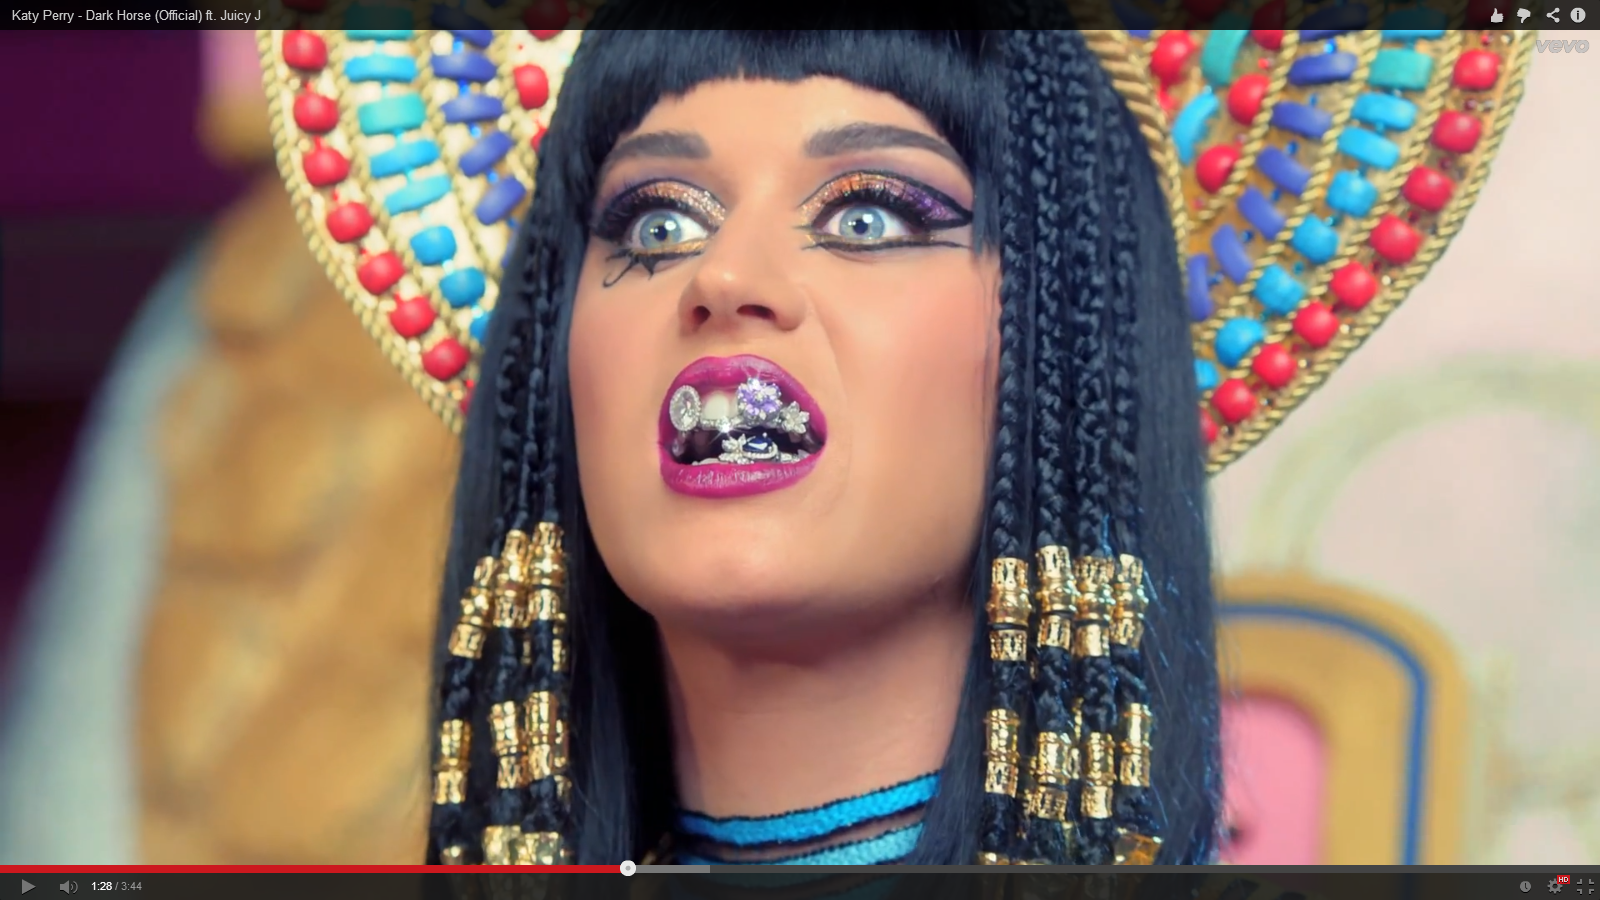 Katy Perry’s “Dark Horse”: So in-your-face, it’s offensive. « Power of Deception1600 x 900